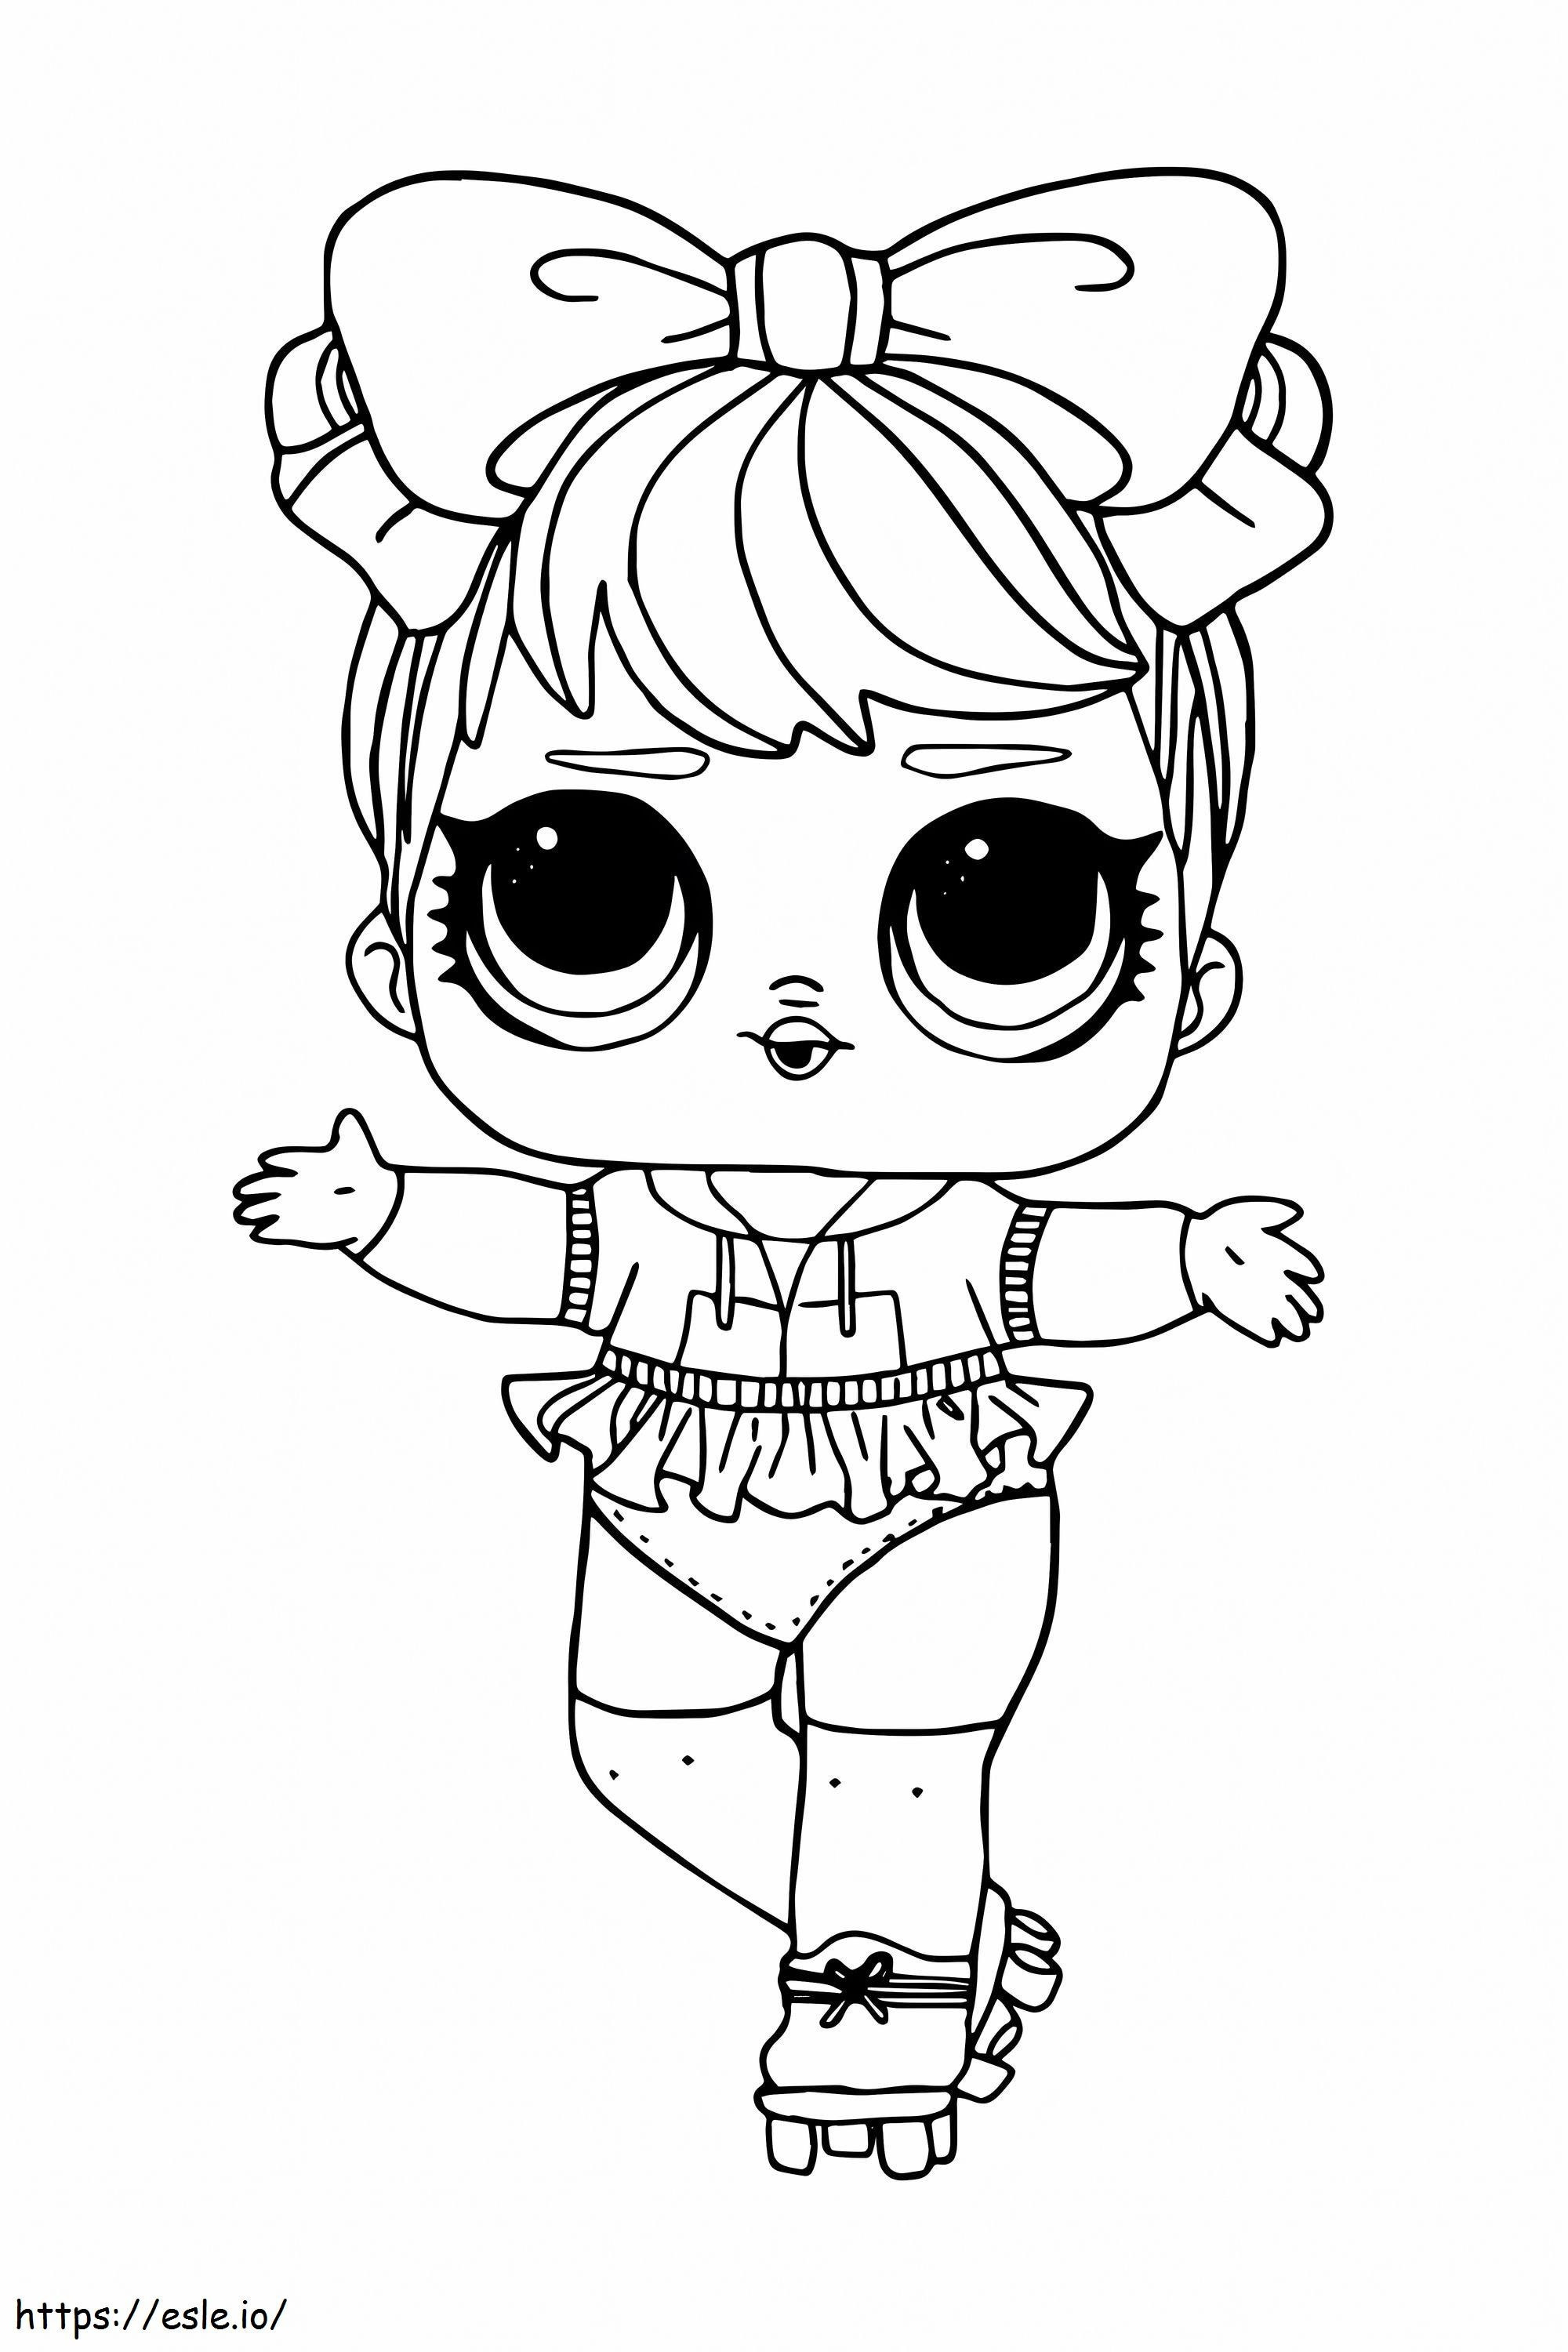 Lol Doll 2 coloring page